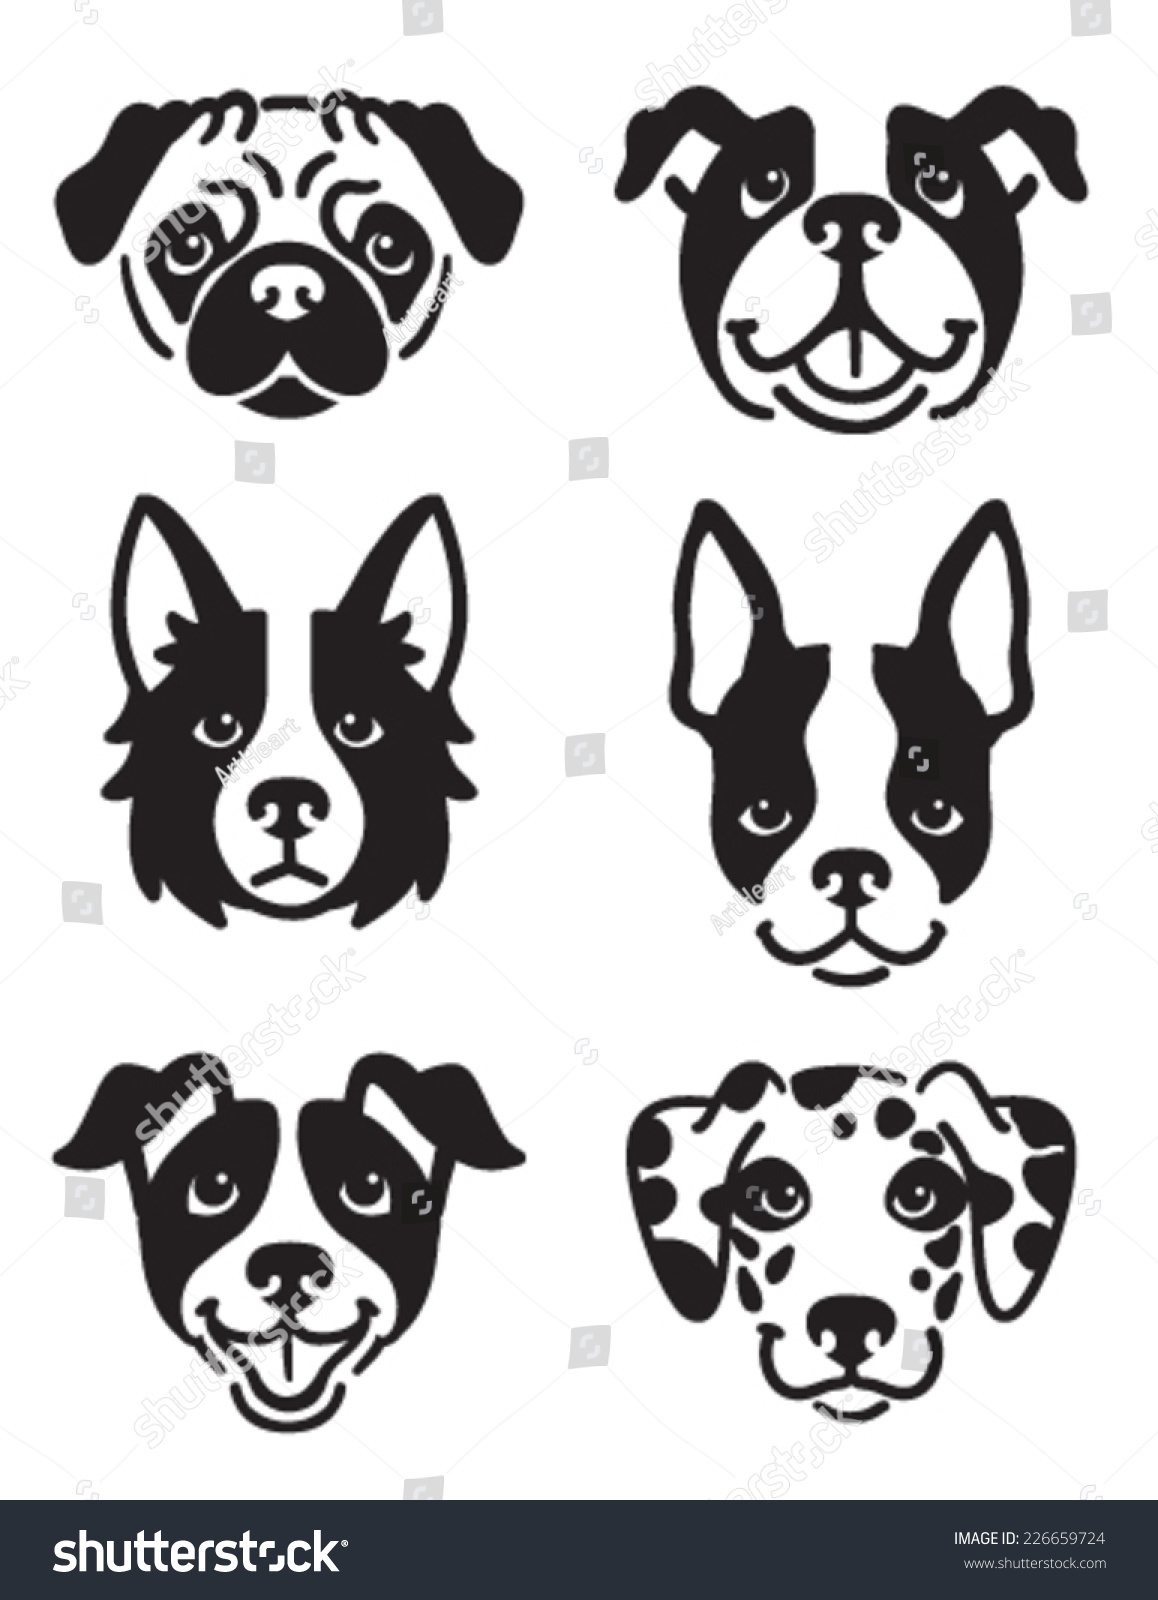 Set 6 Dog Icons Featuring Faces Stock Vector (Royalty Free) 226659724